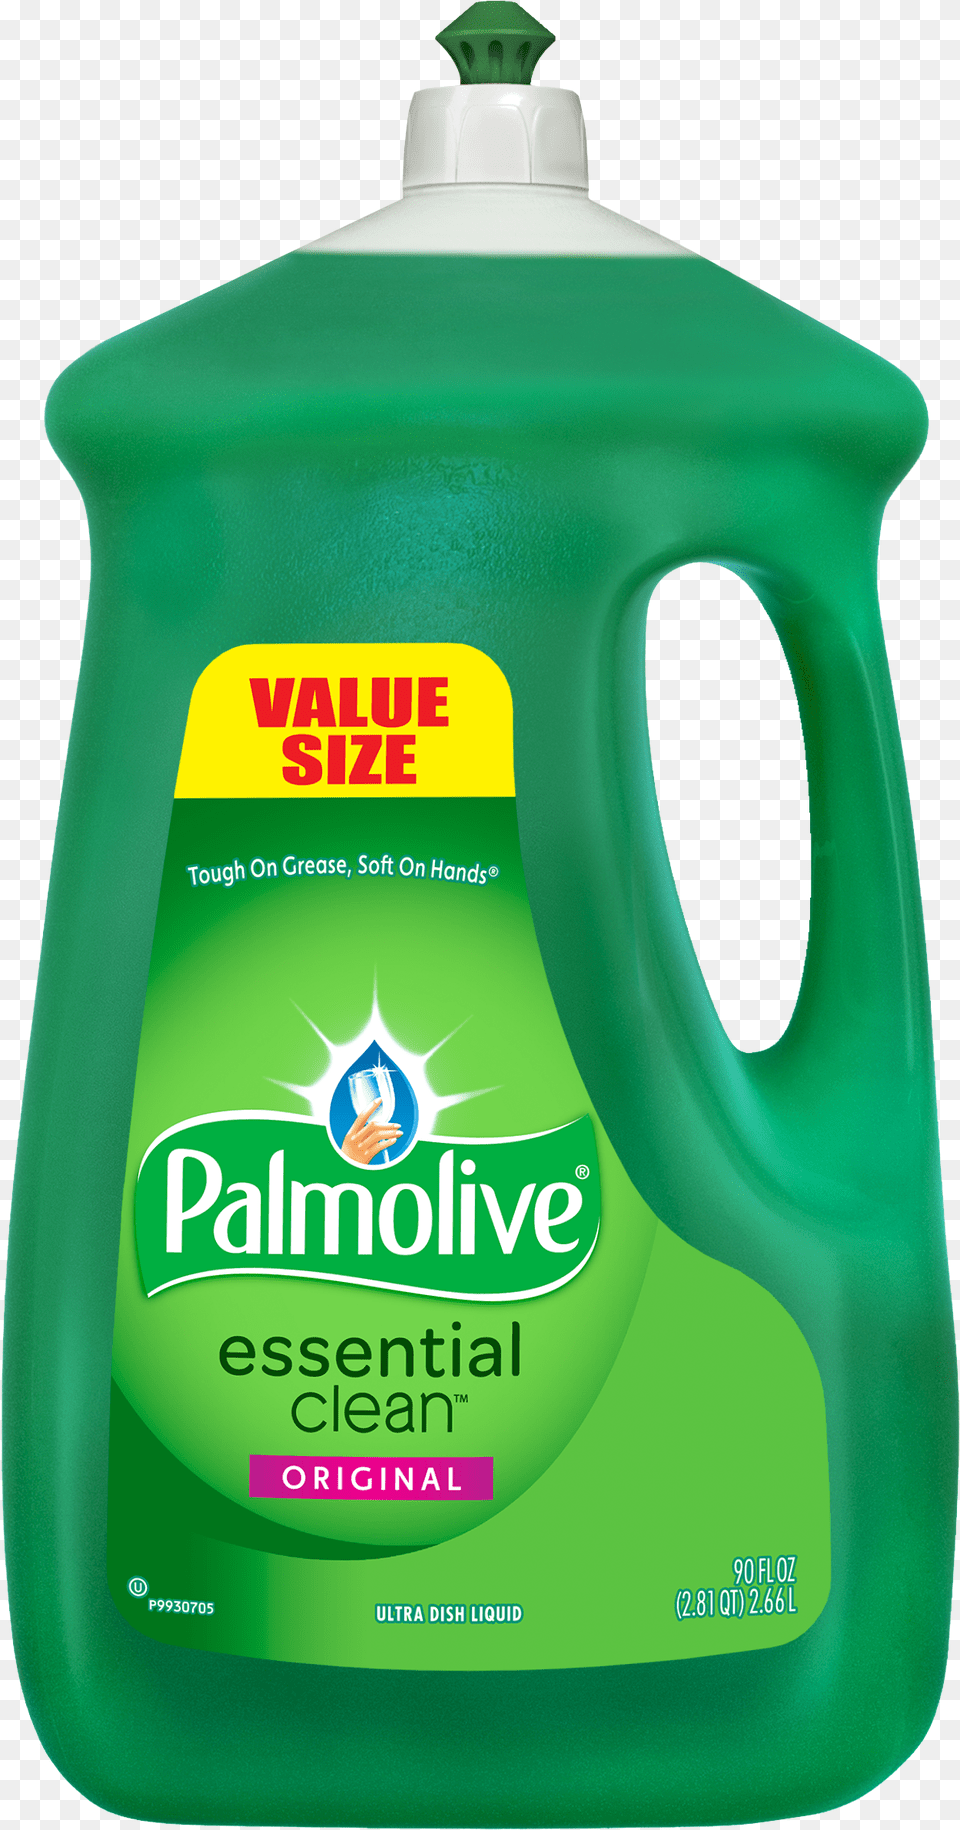 Palmolive Dish Soap, Bottle, Can, Tin Png